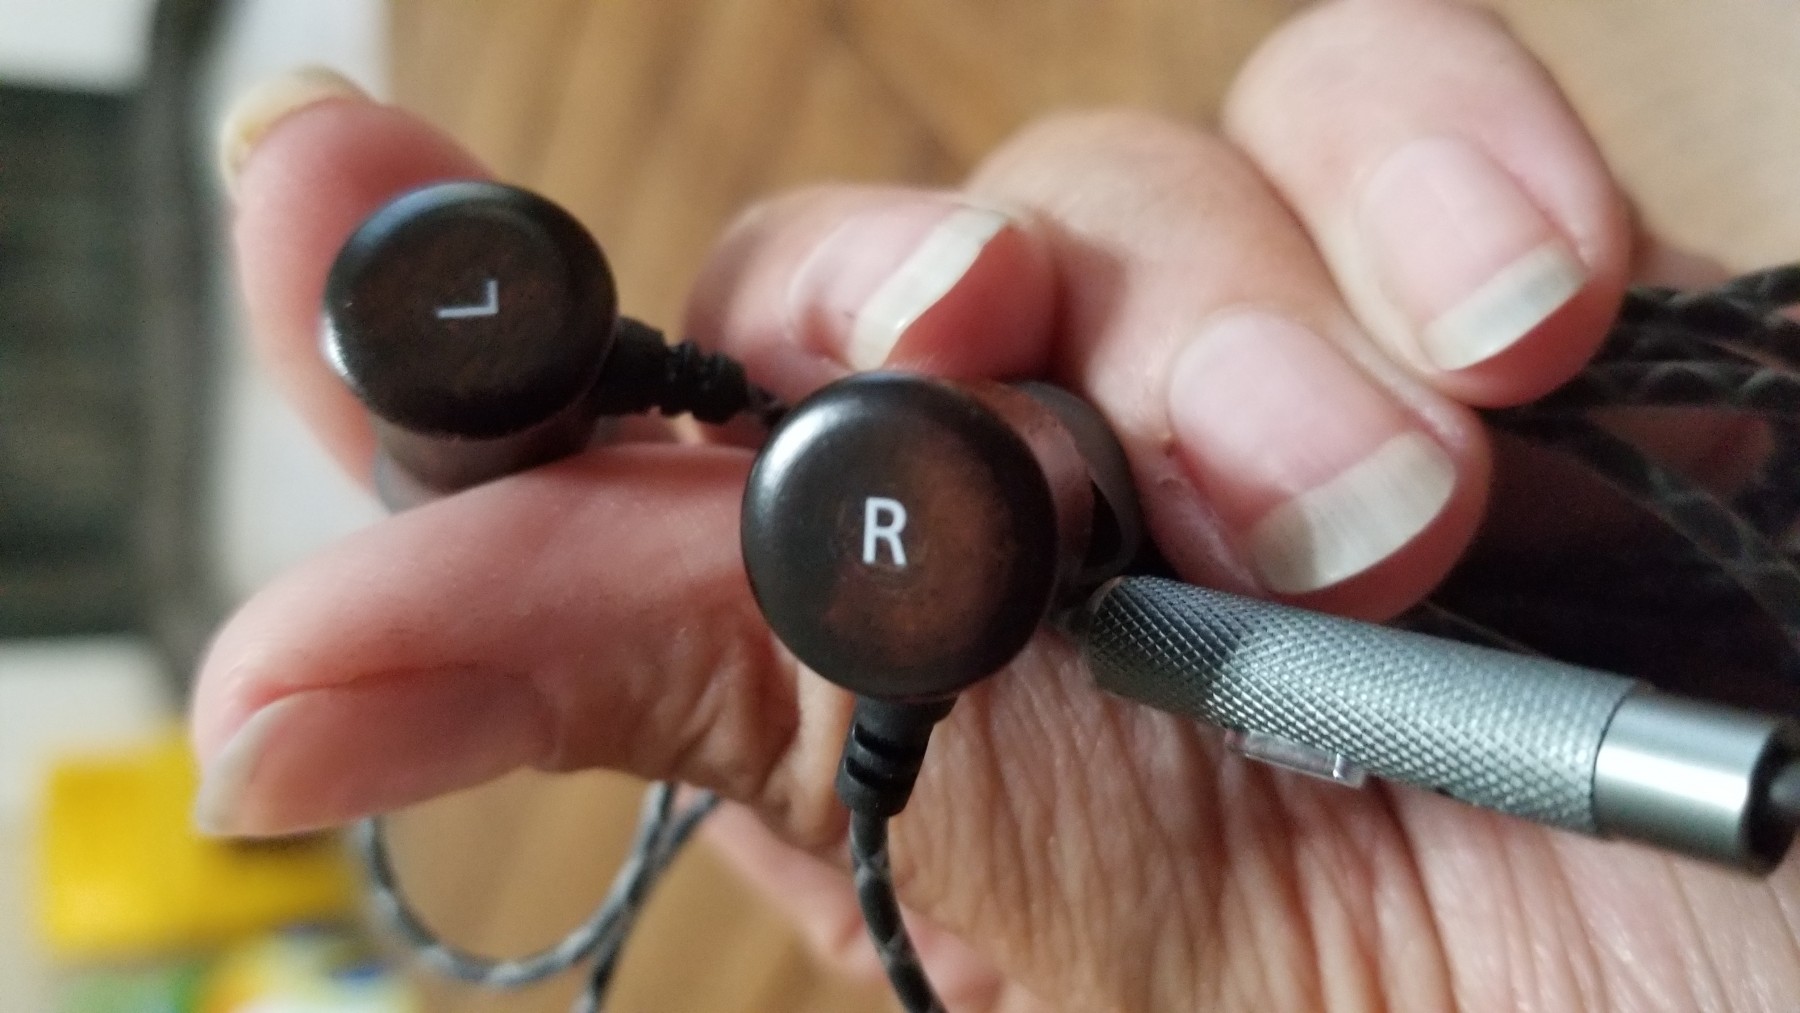 Love the wood look of these earbuds